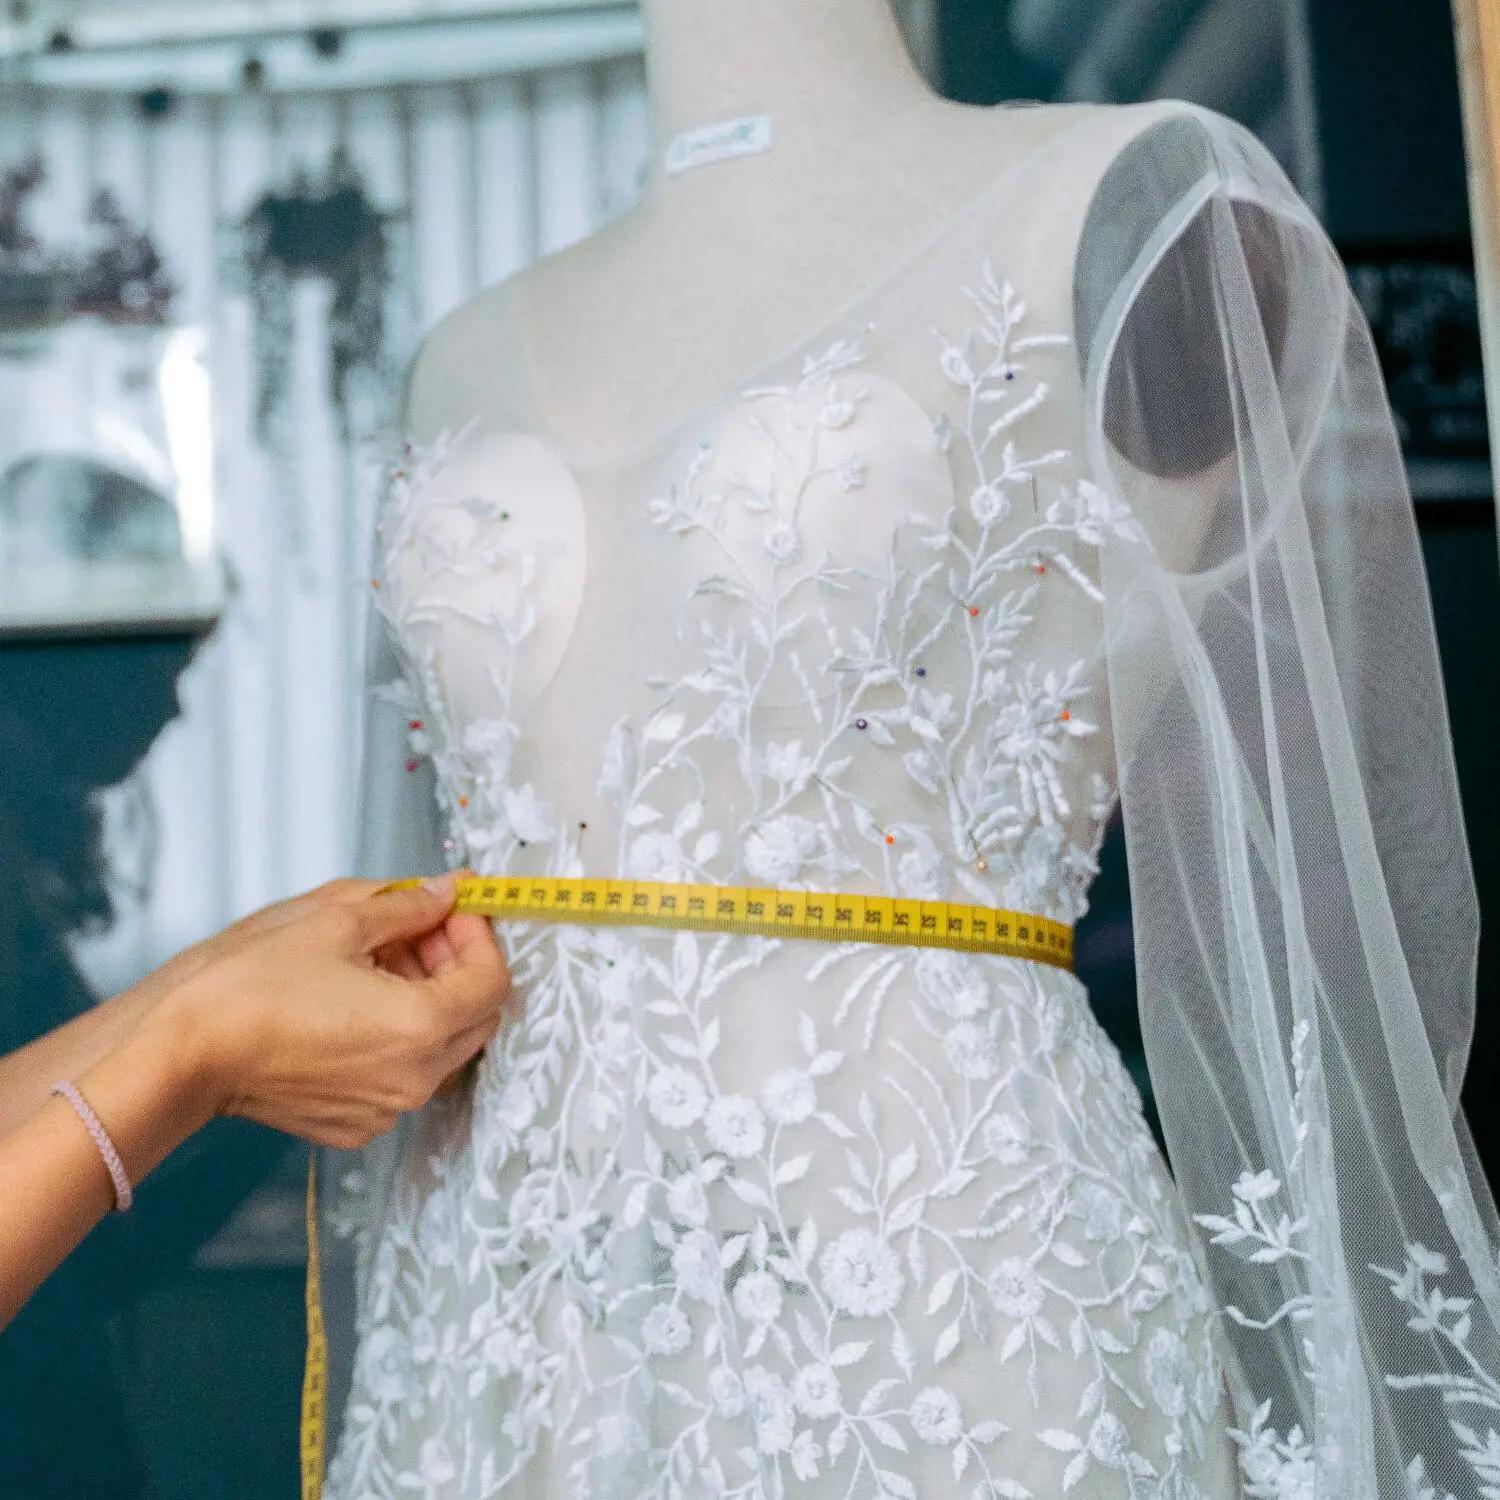 Don’t Get Your Wedding Dress Altered Without Asking These 4 Questions First. Desktop Image